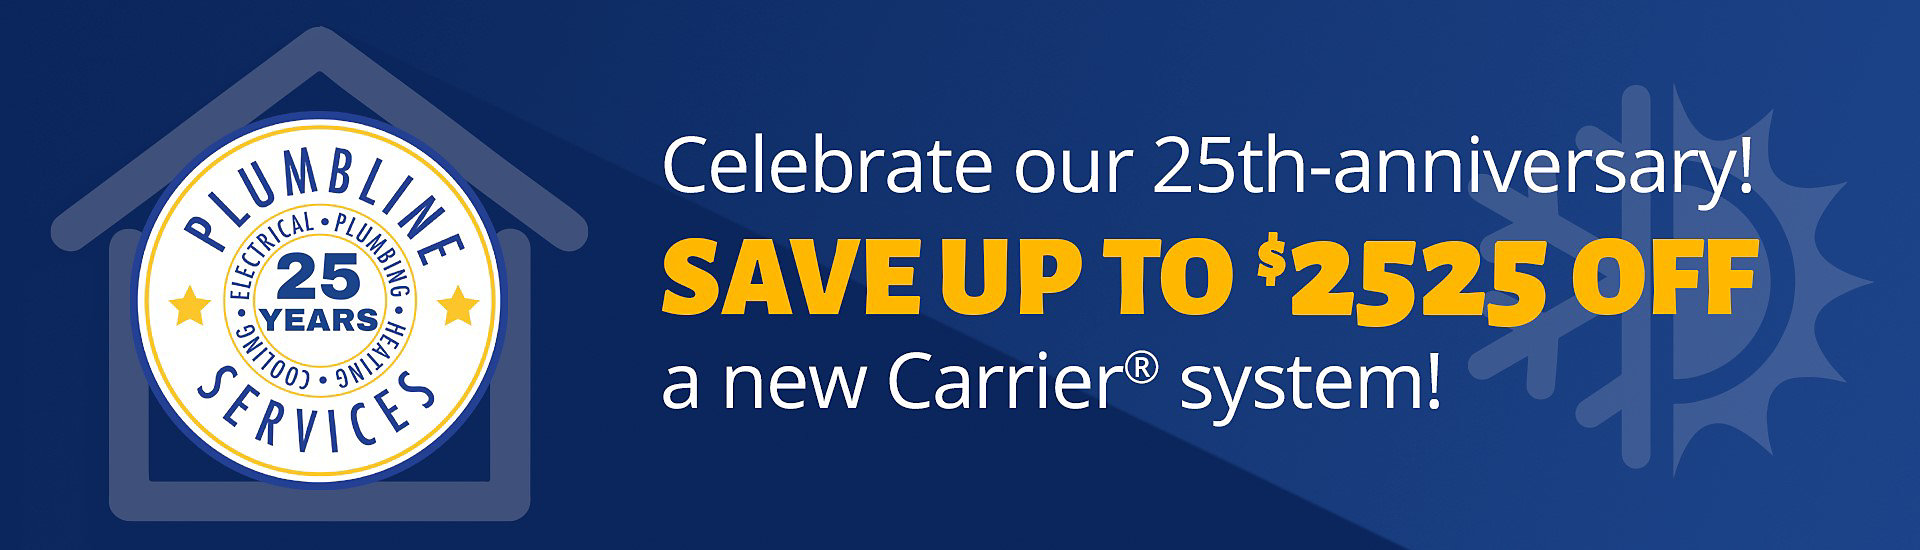 25 Years Anniversary Carrier Offer